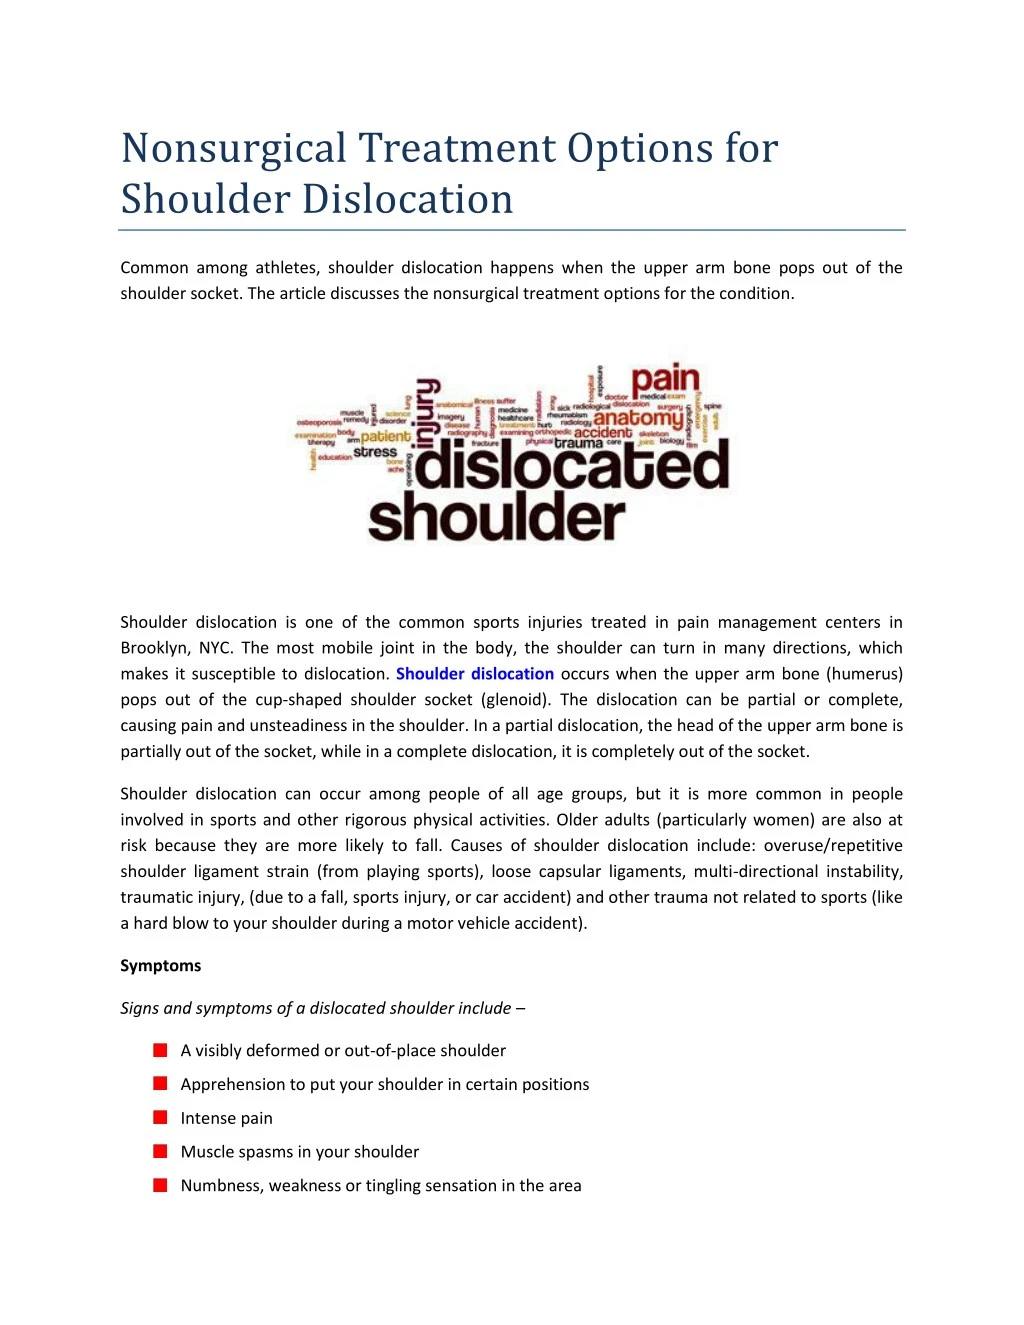 nonsurgical treatment options for shoulder